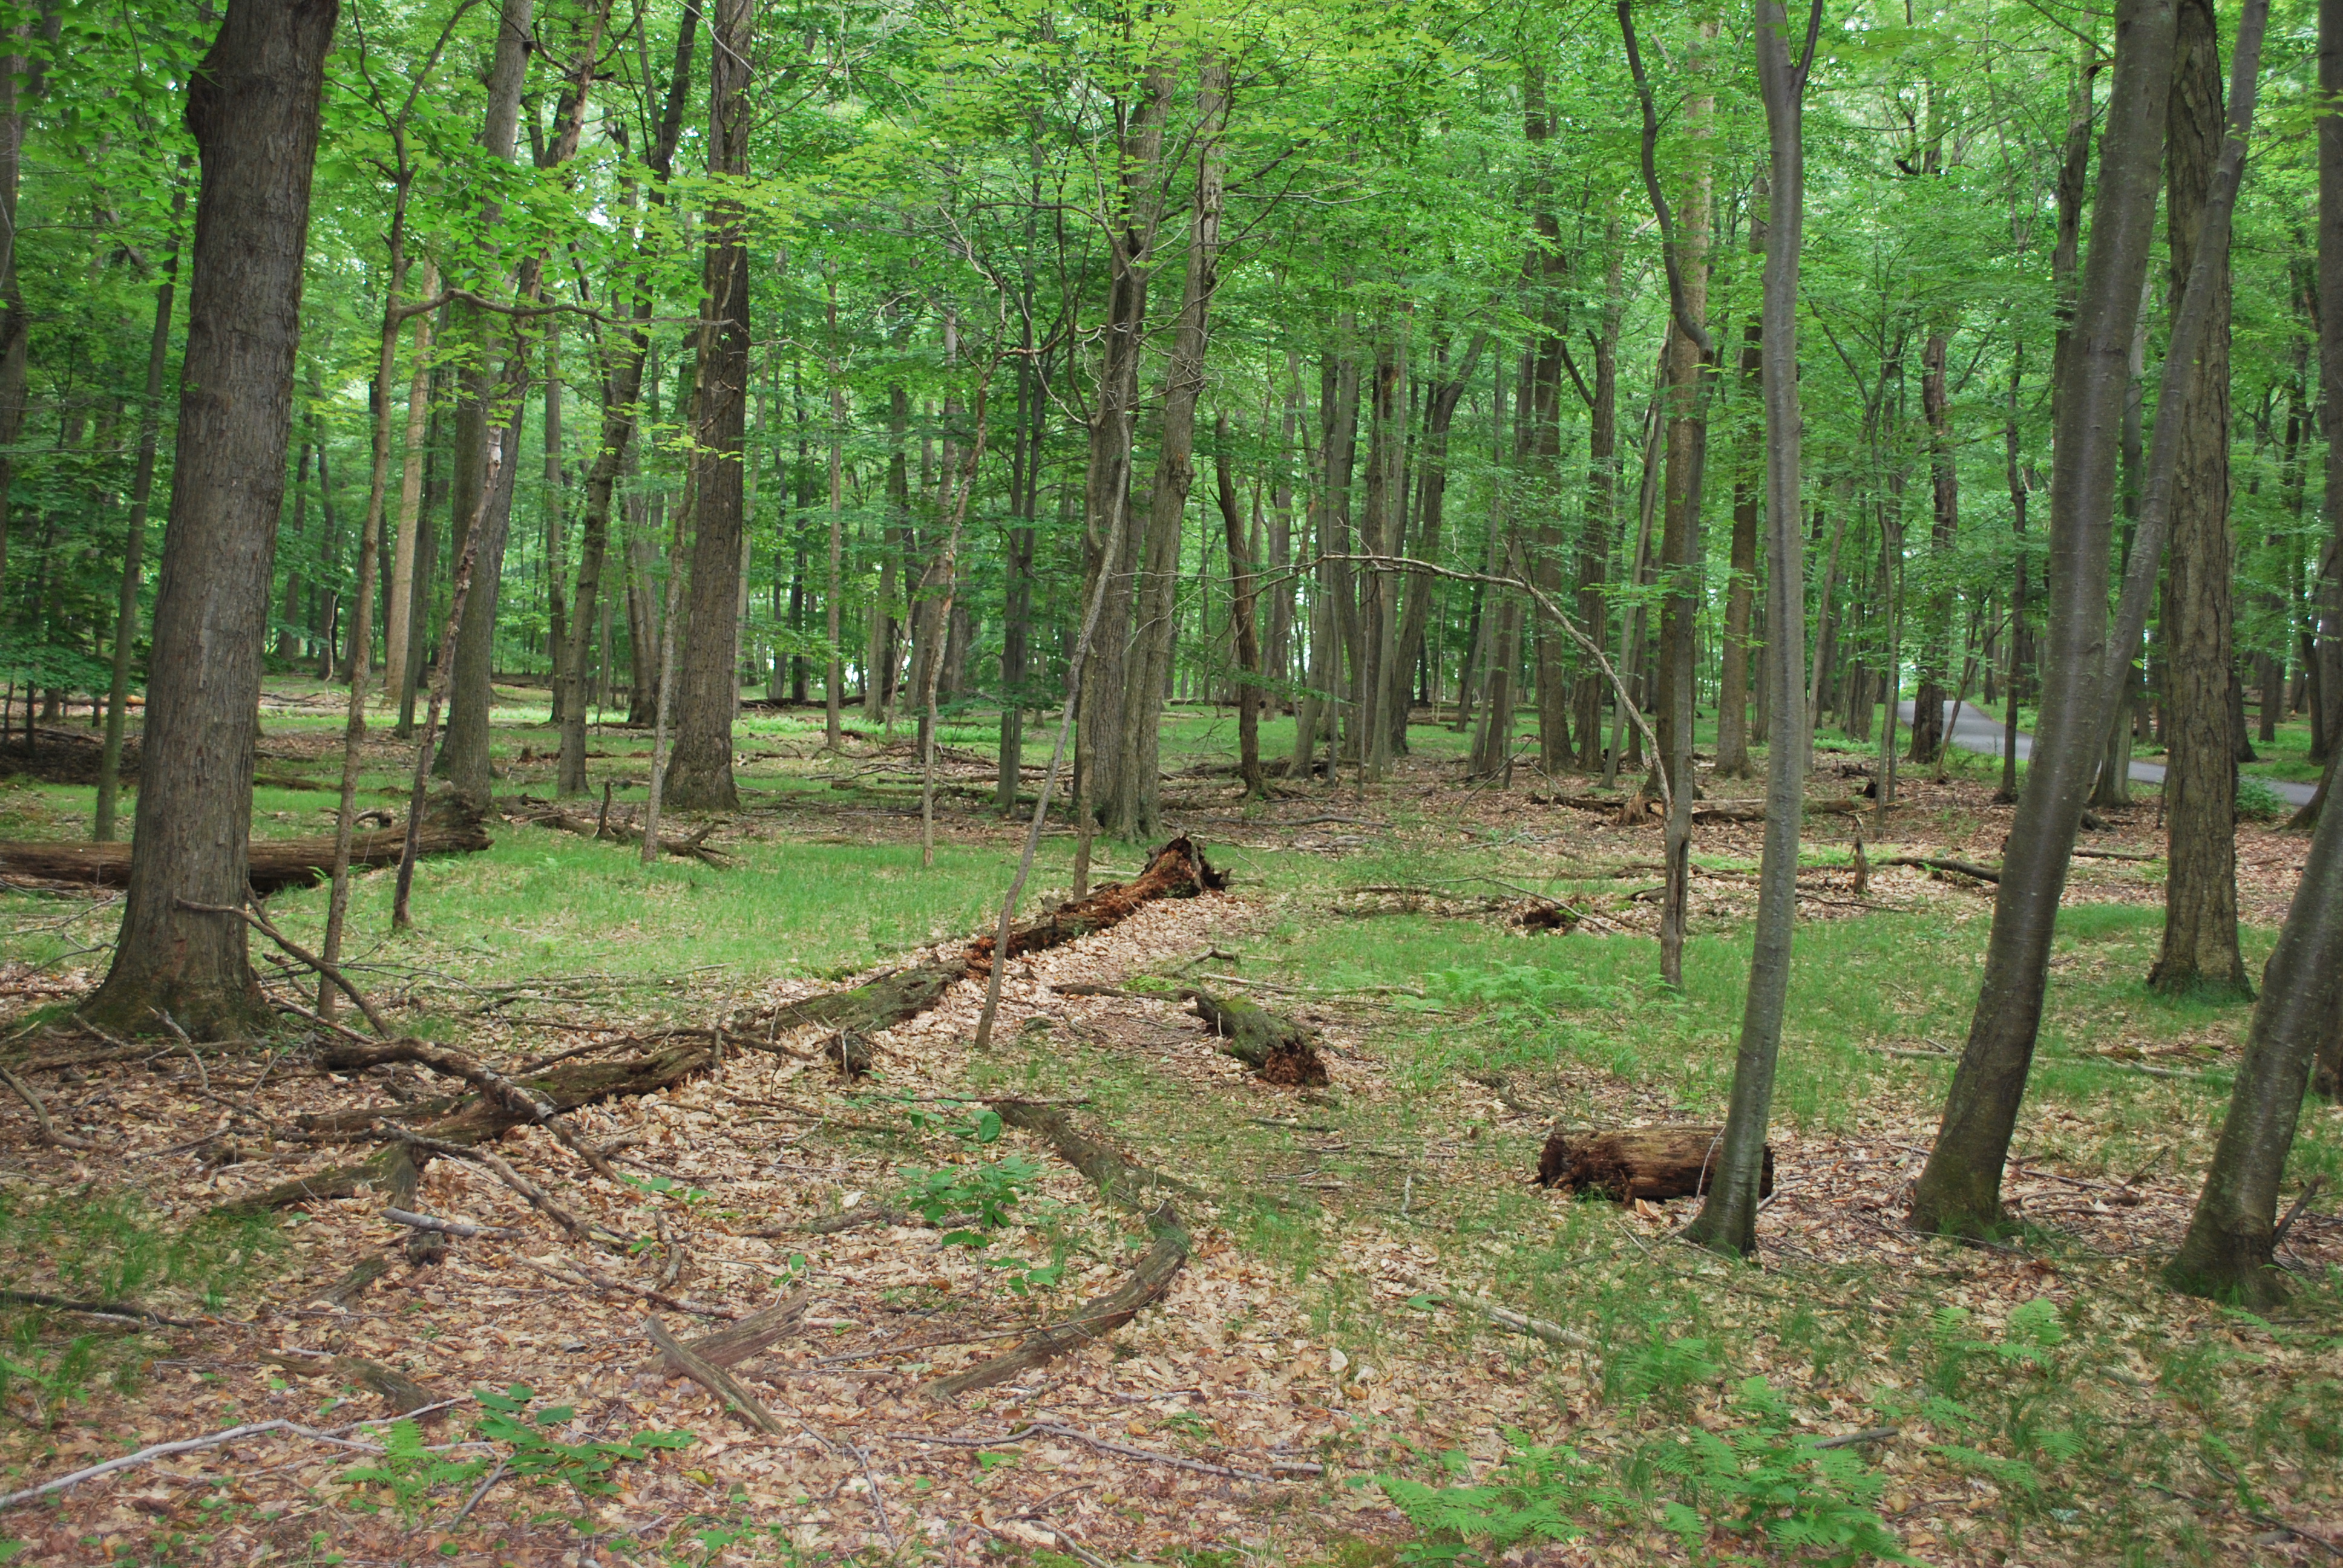 Wooded area with trees and no undergrowth